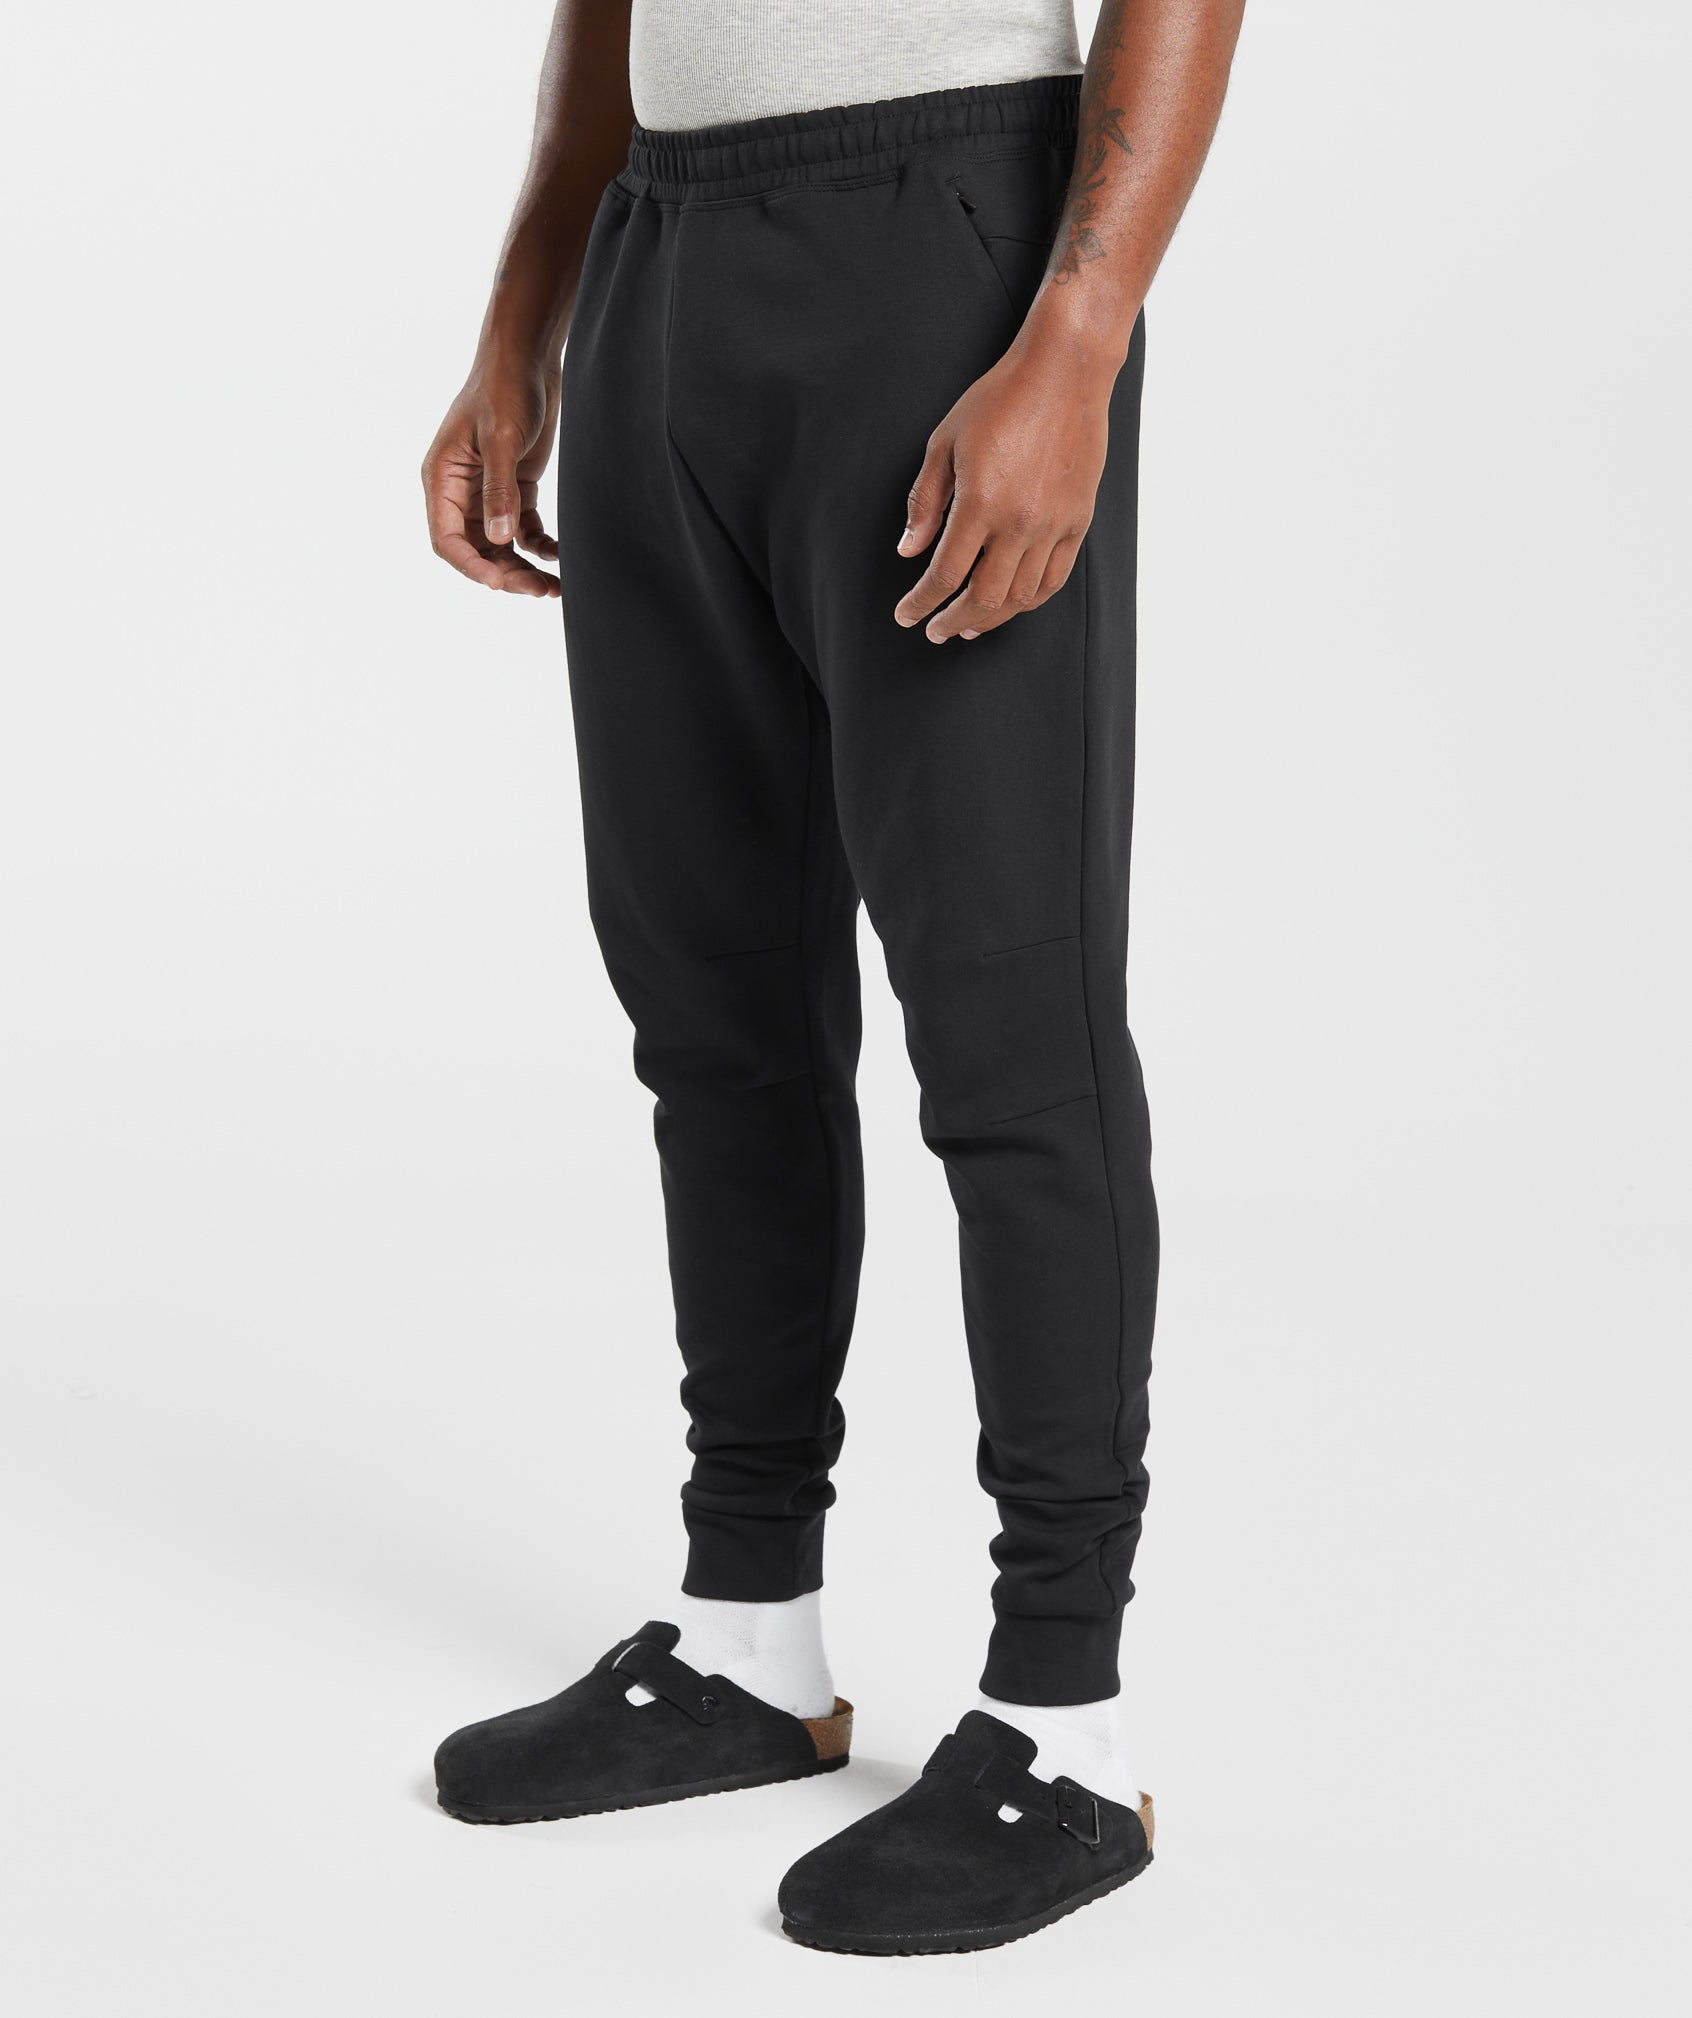 Rest Day Knit Joggers in Black - view 3